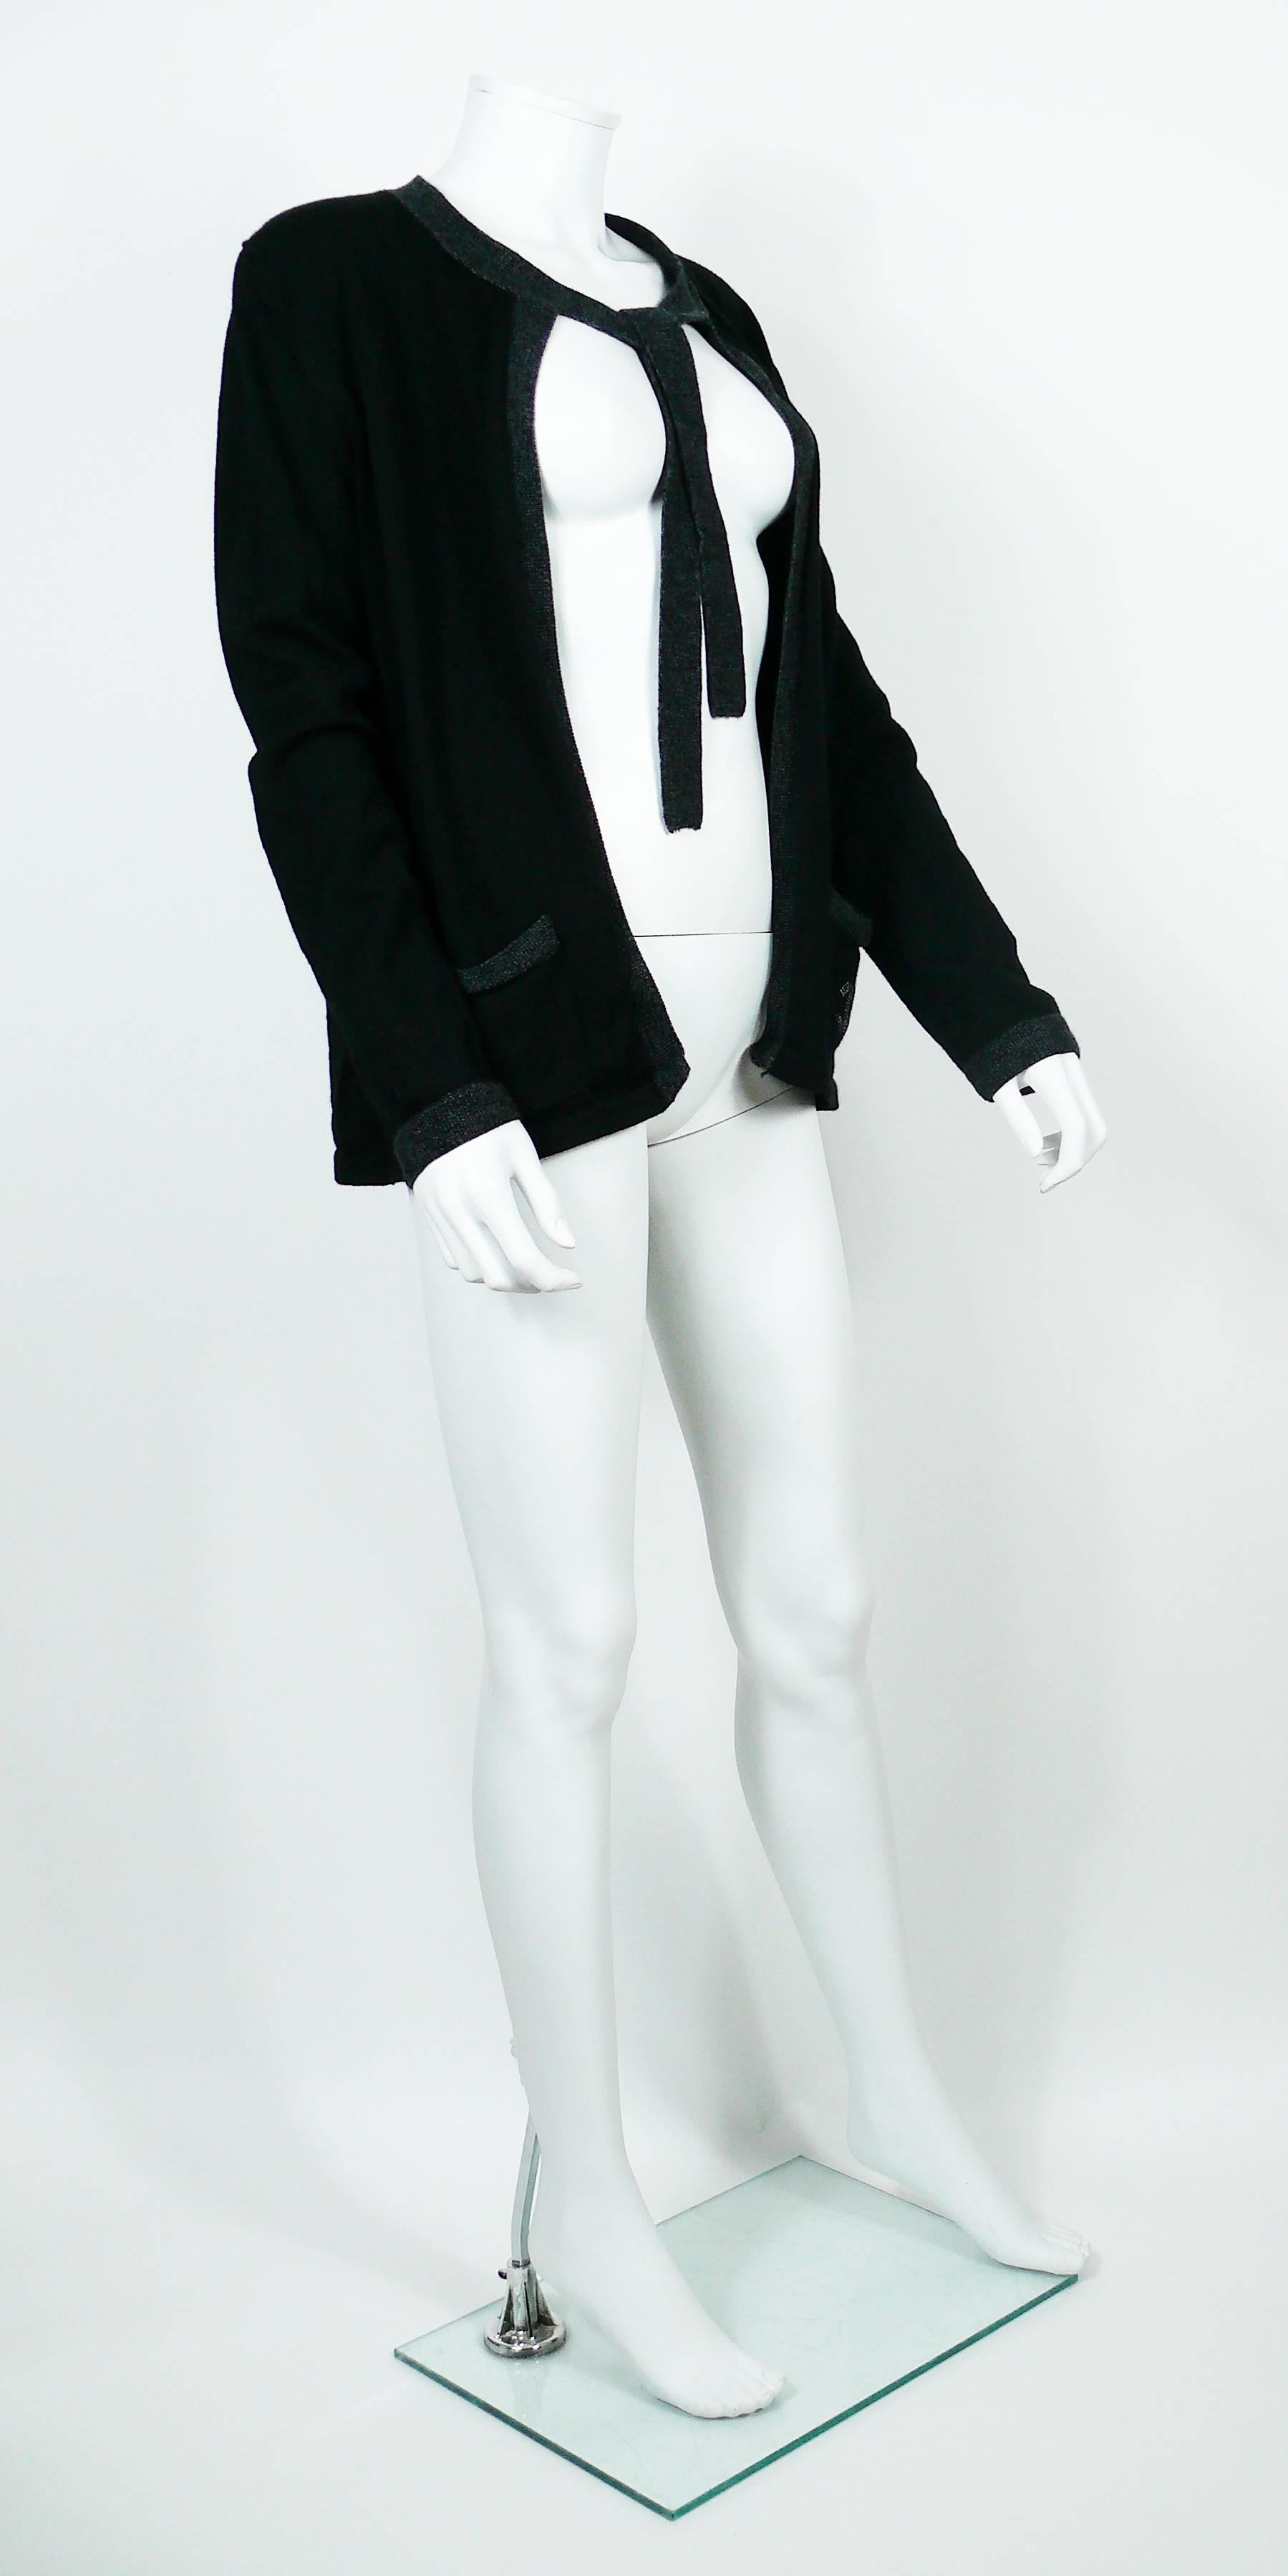 CHANEL Uniform black wool cardigan with grey trim and CC logo detail on left pocket.

Please note this item was original part of a CHANEL employee uniform.

Label reads CHANEL UNIFORM.
Made in China.

Size tag reads : XL.
Please refer to